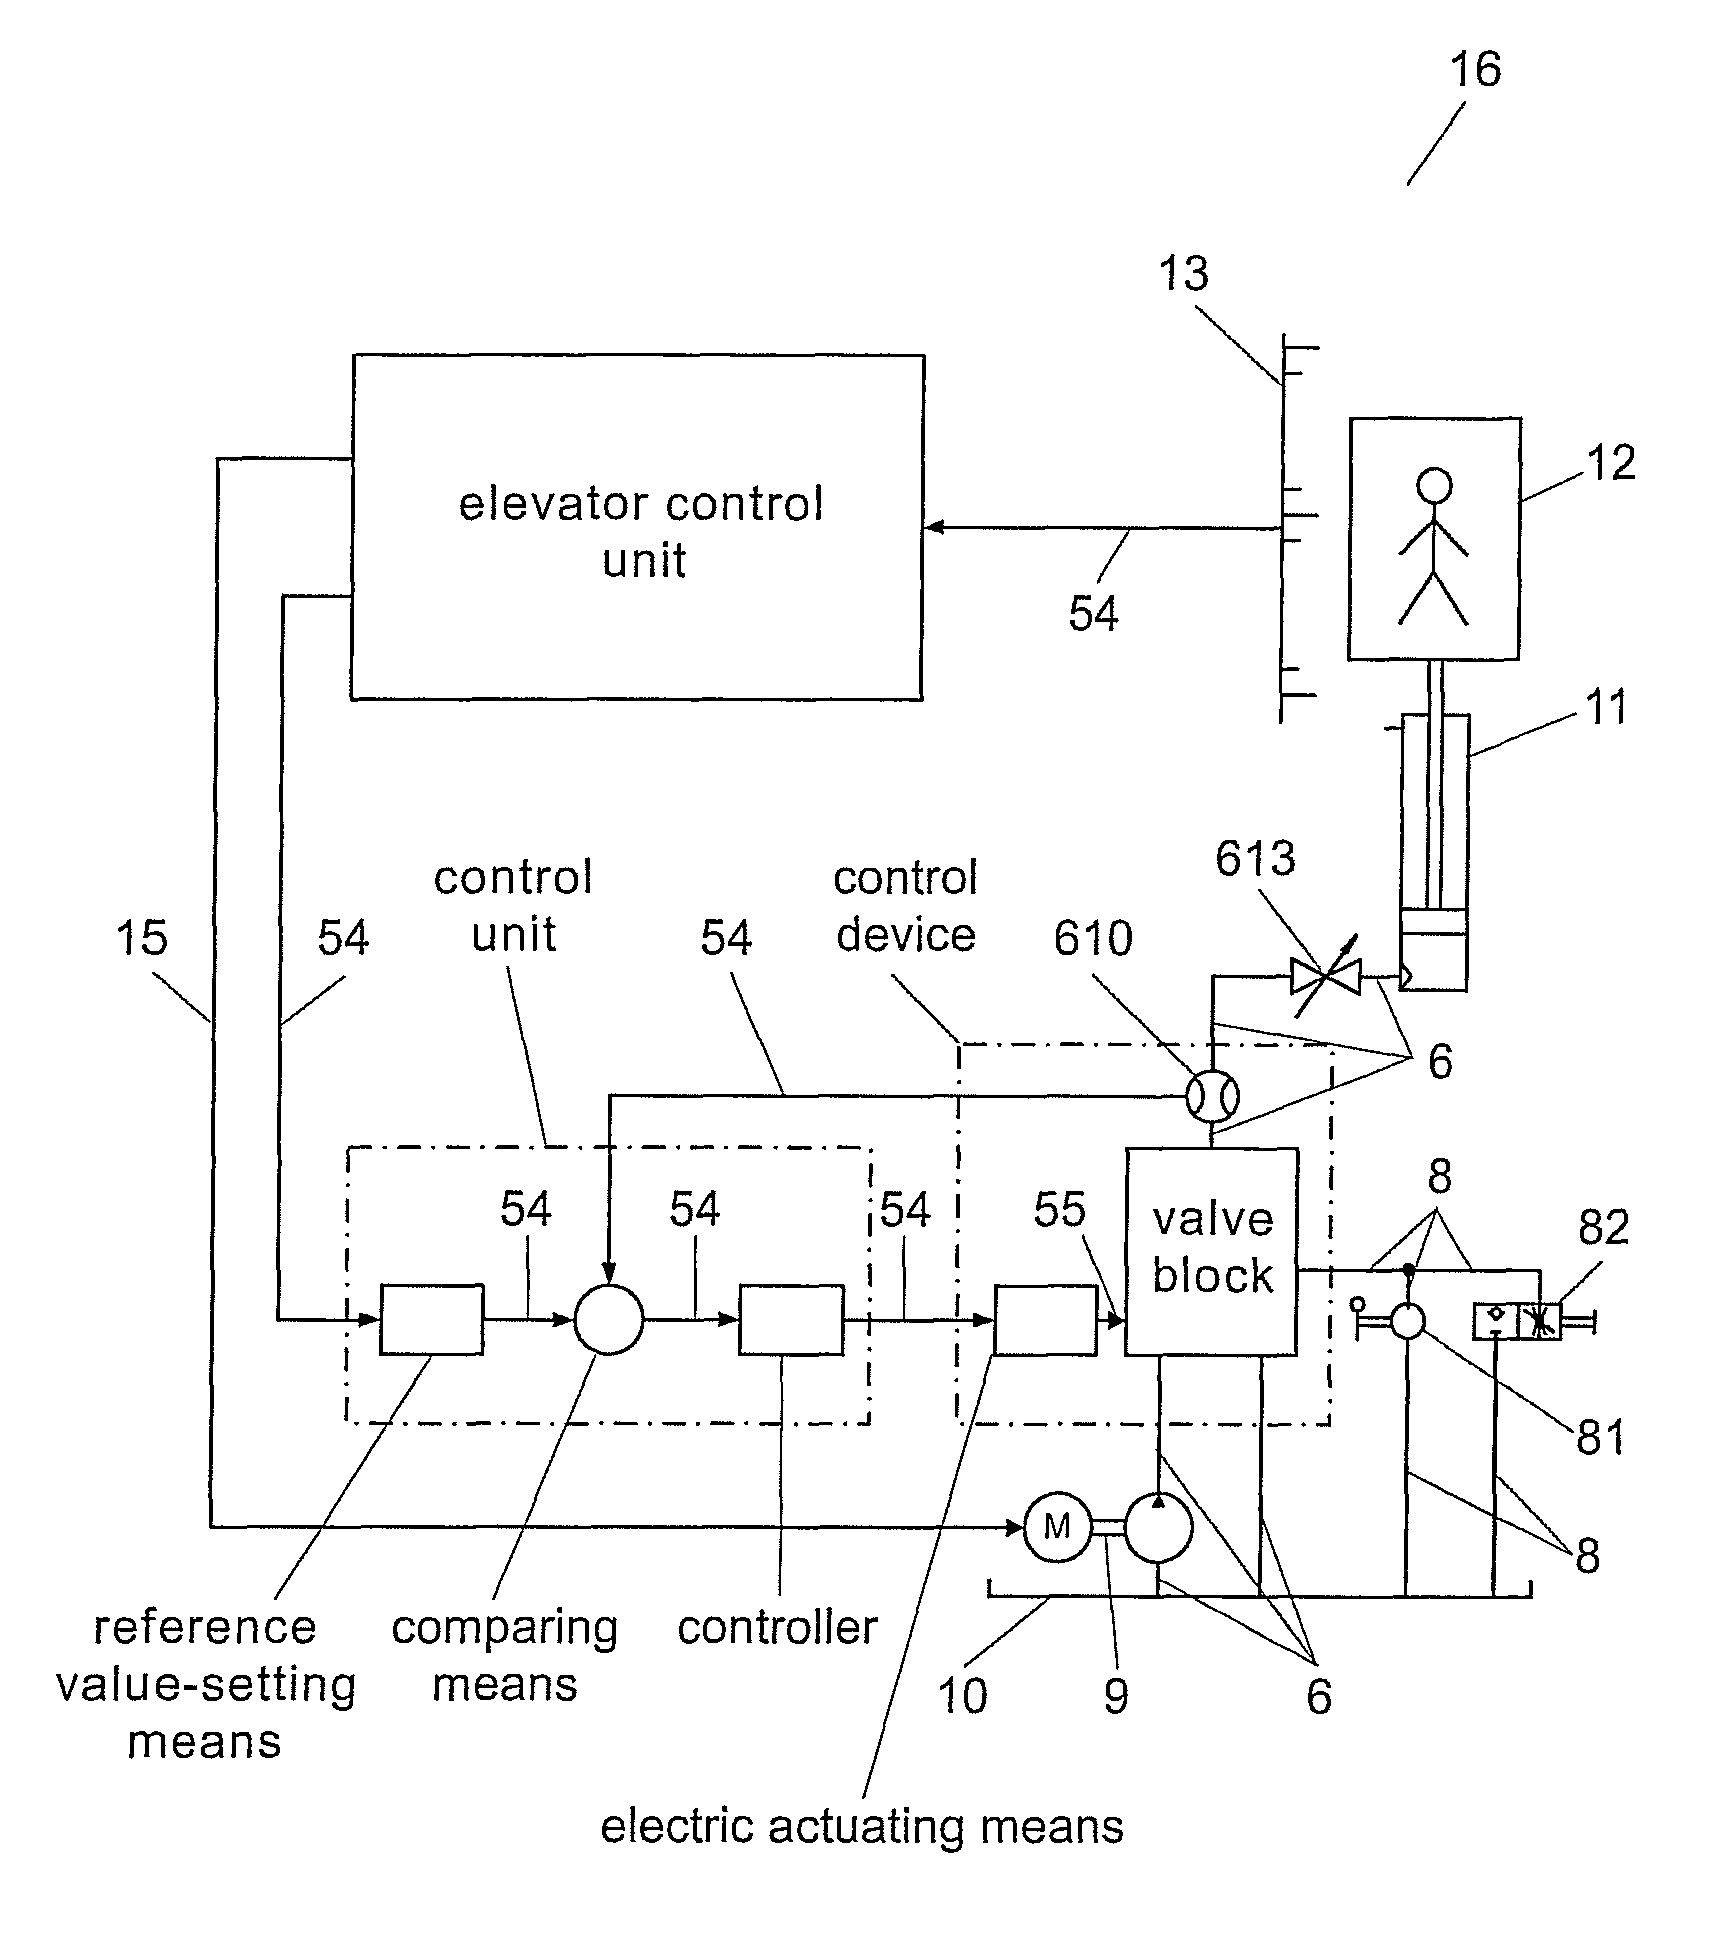 Control device for a hydraulic elevator drive